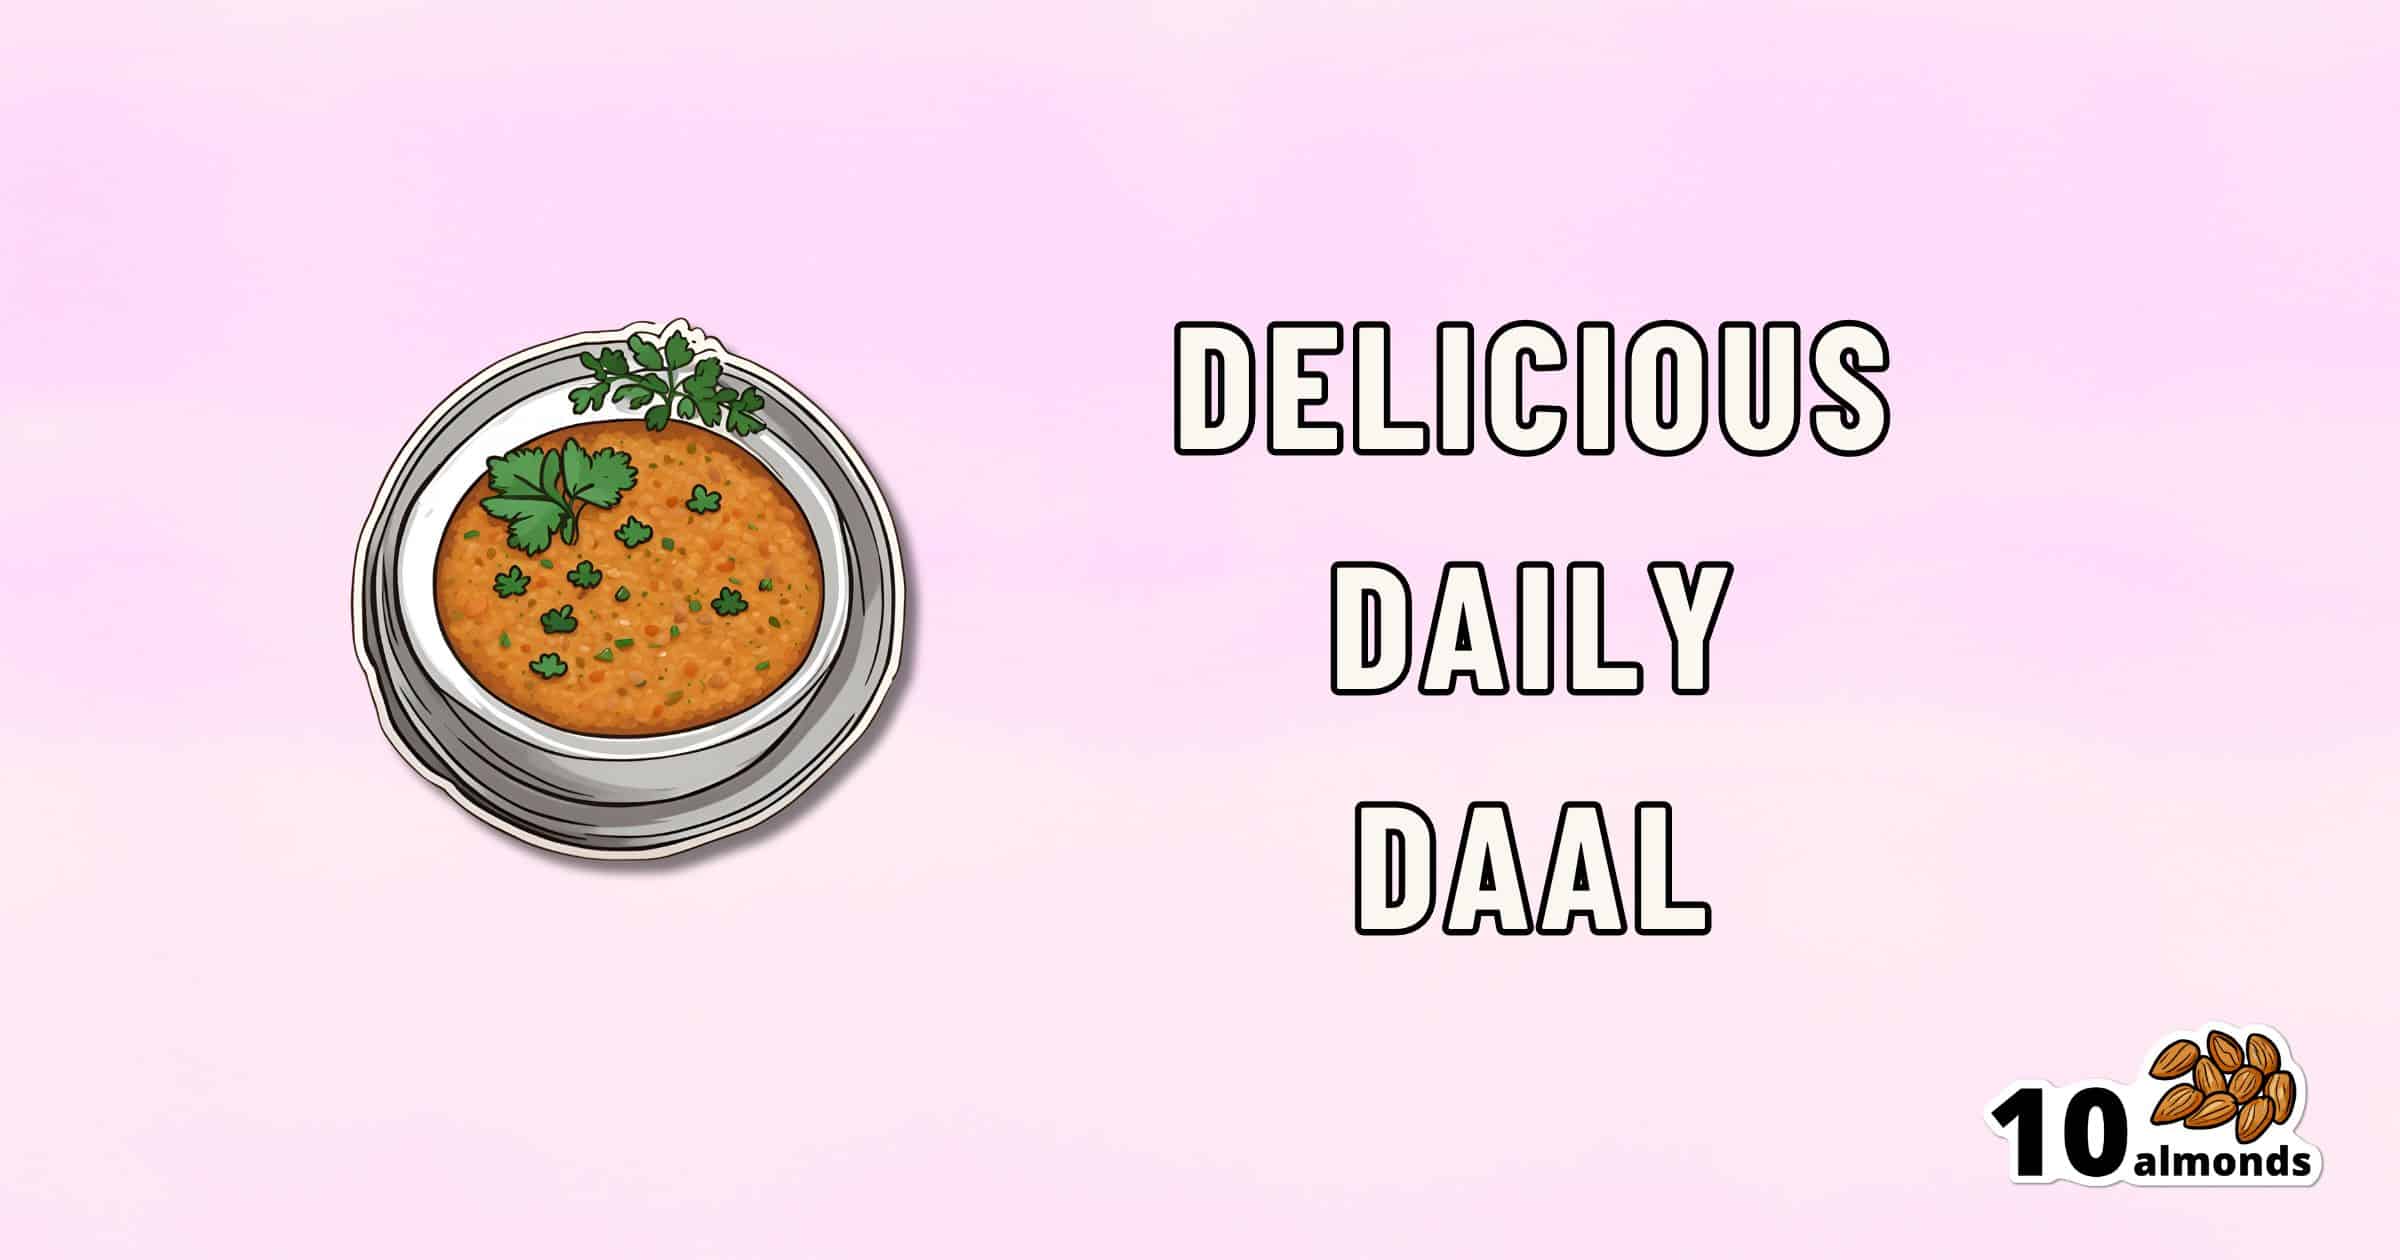 A bowl of orange lentil daal garnished with green herbs sits on the left against a light pink background. On the right, the text reads "Delicious Daily Daal." In the bottom right corner, an icon of 10 almonds is accompanied by the text "10 almonds.